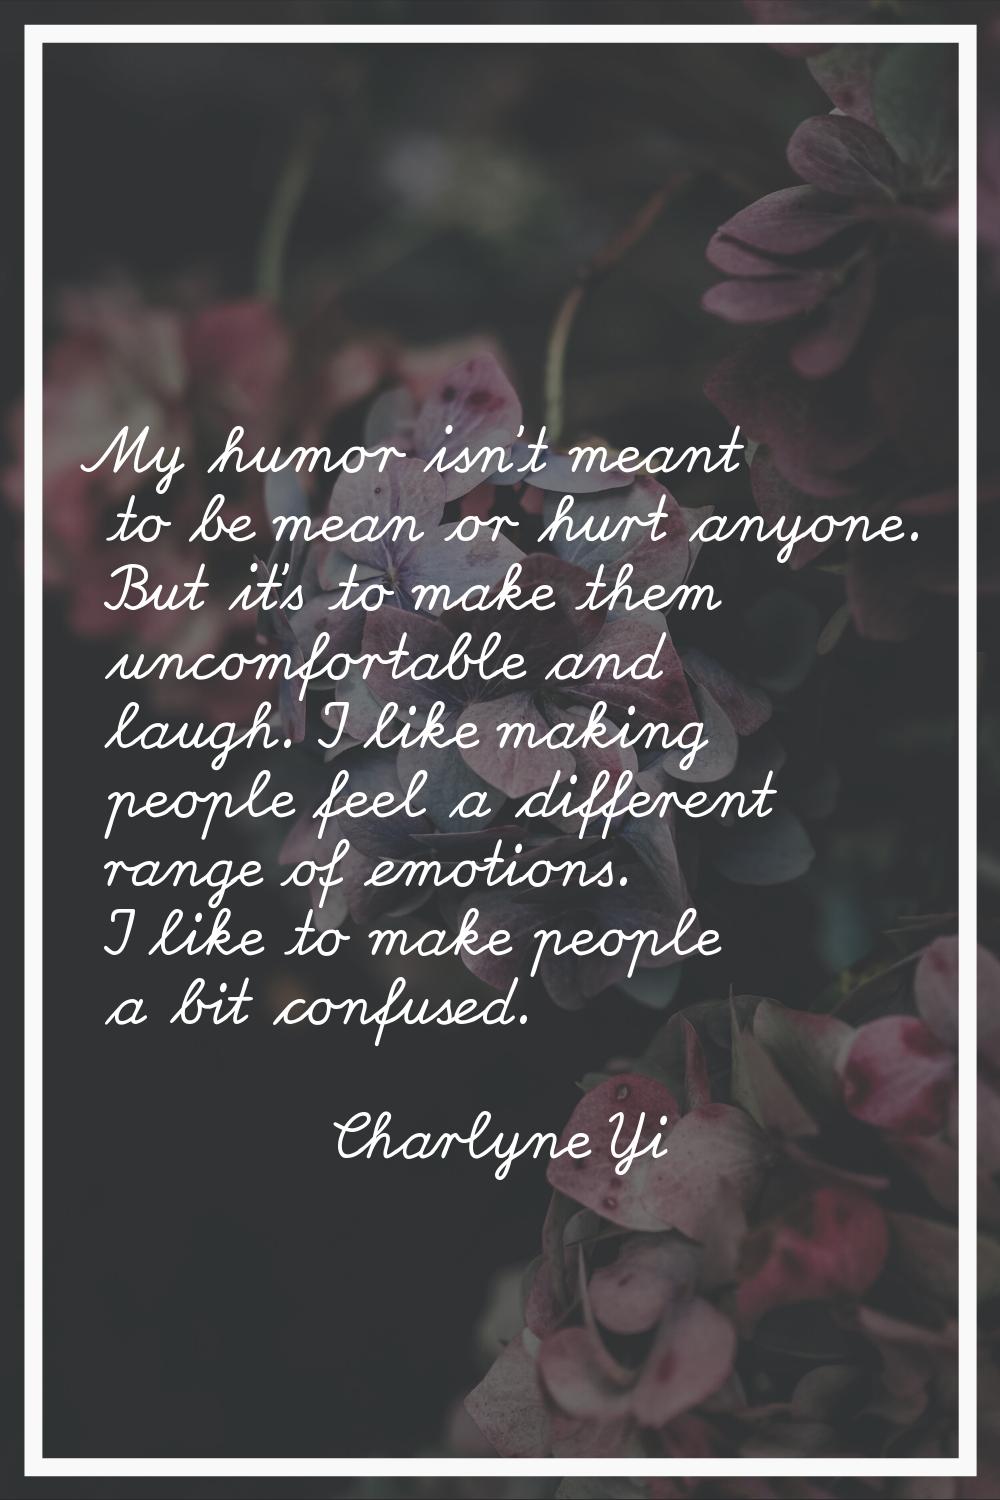 My humor isn't meant to be mean or hurt anyone. But it's to make them uncomfortable and laugh. I li